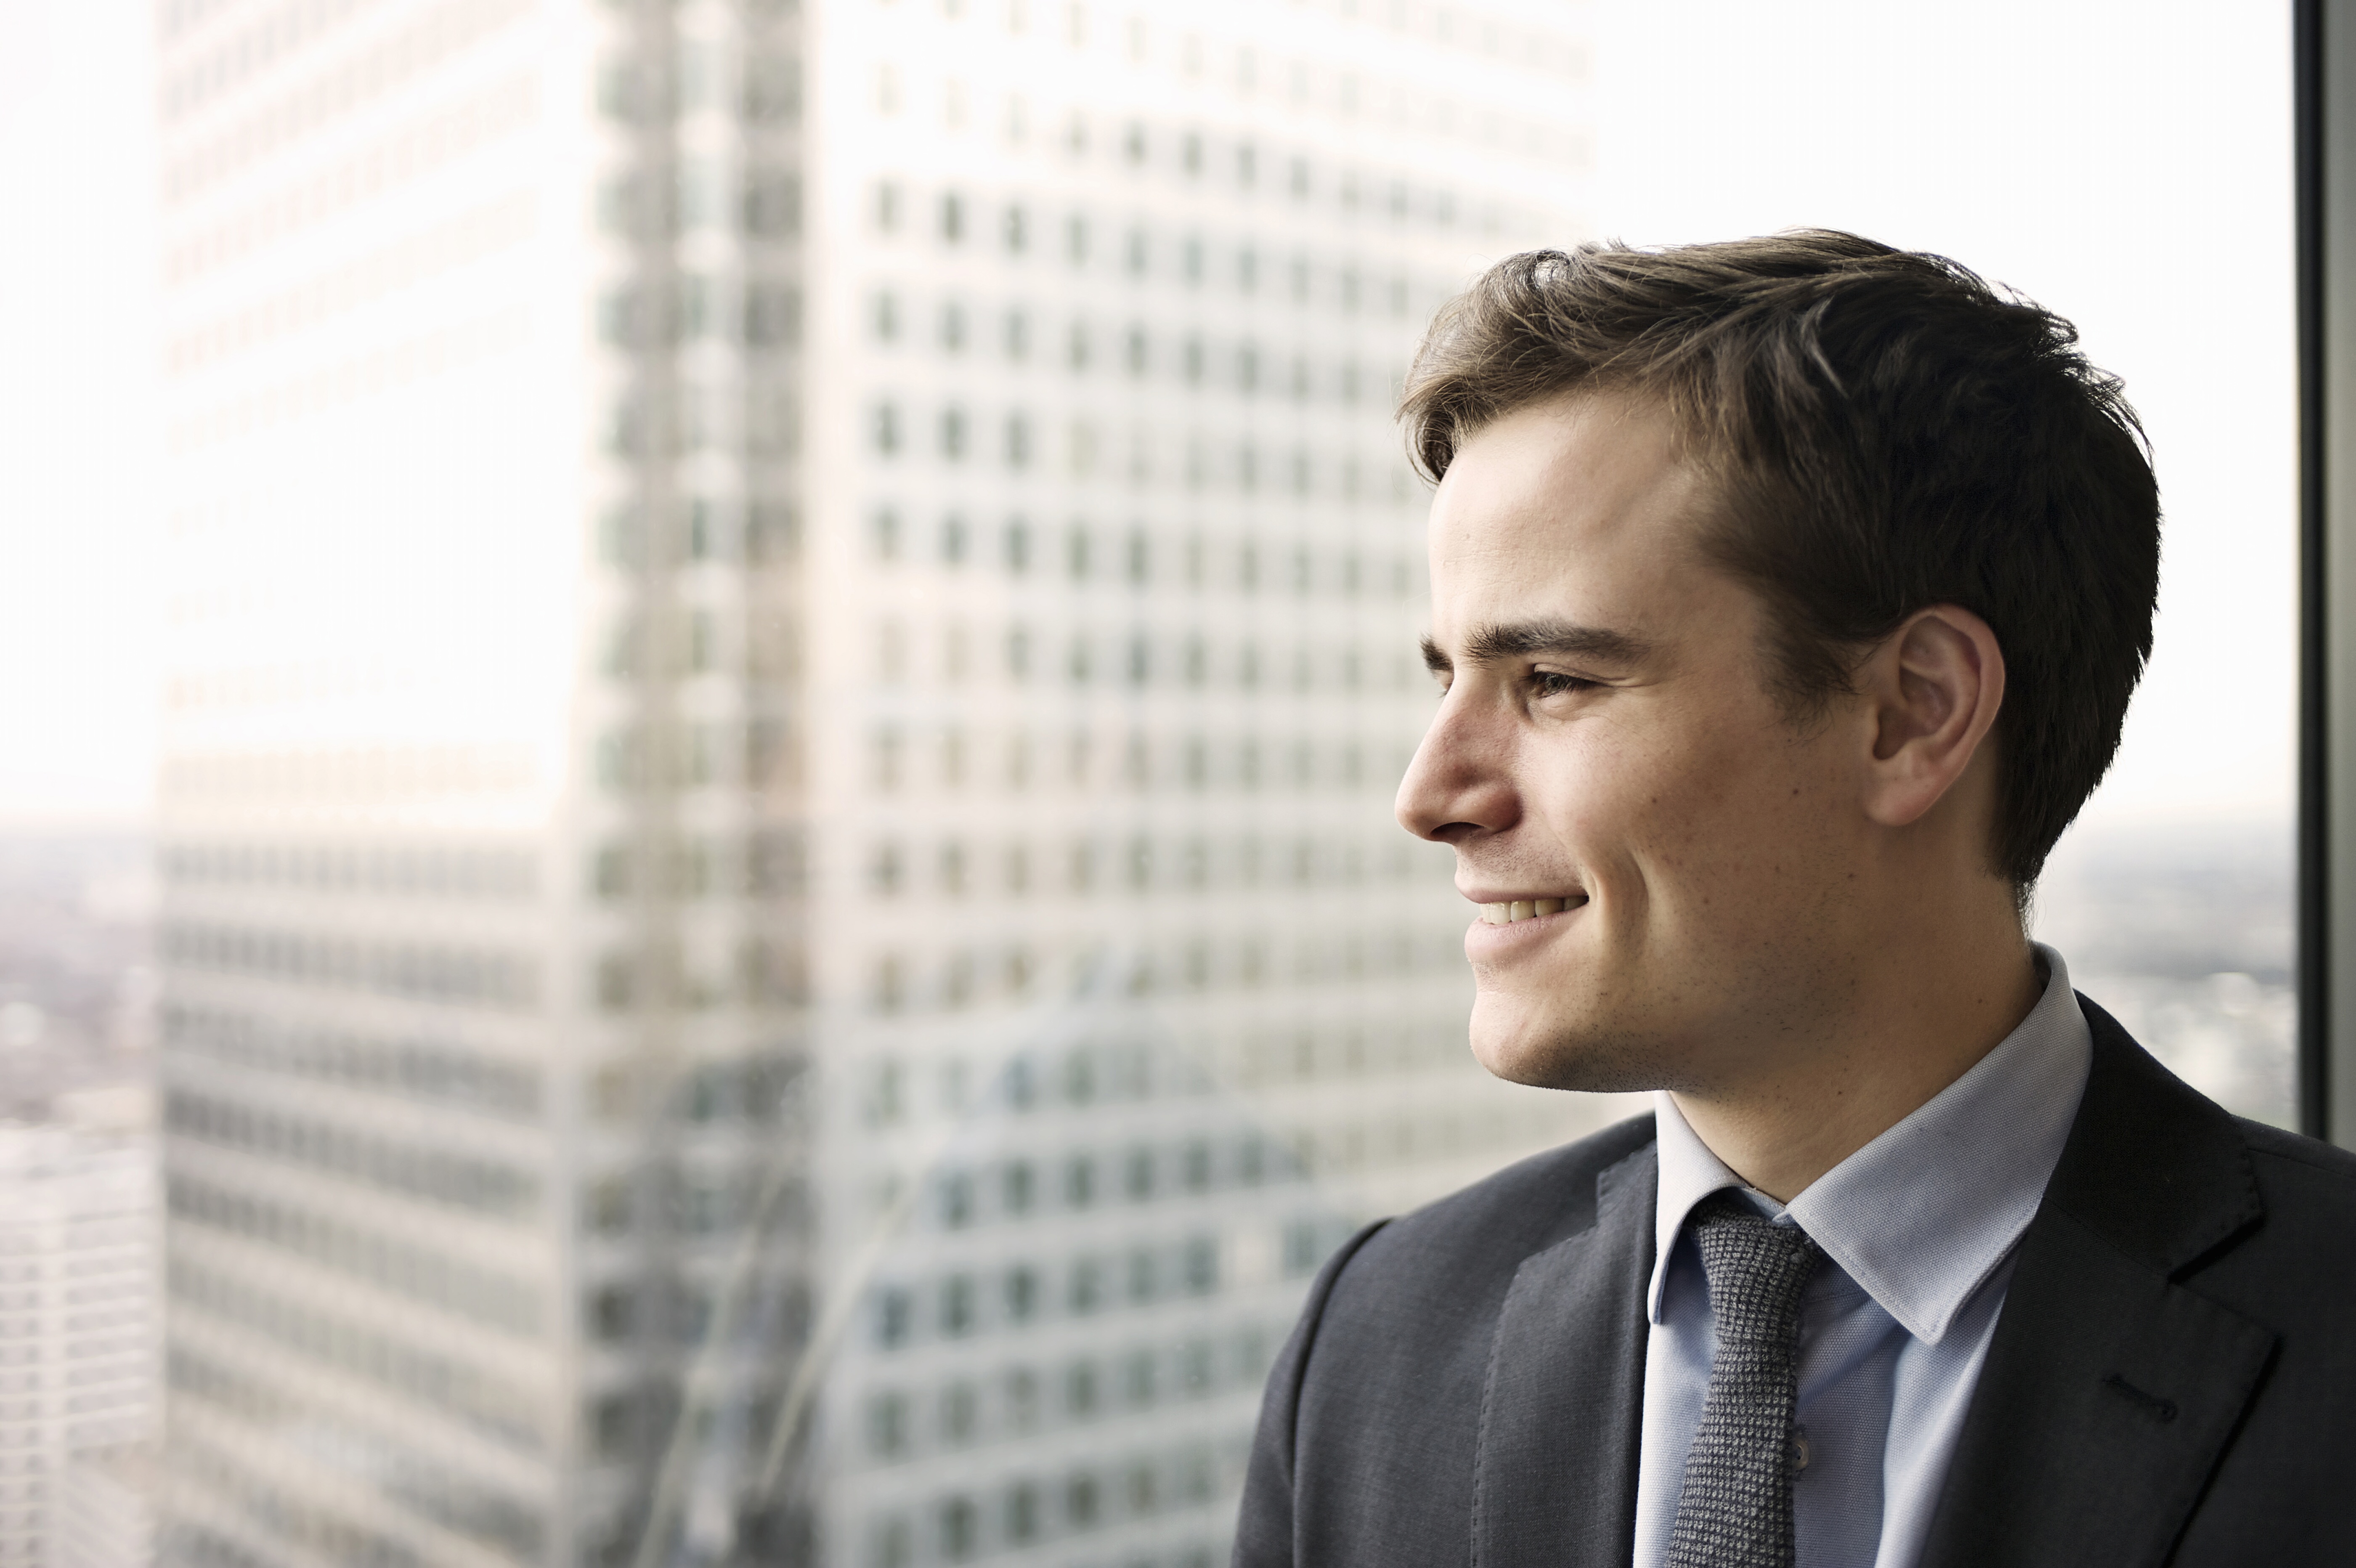 Portrait of a young business man smiling and looking out of a large window he is standing next to